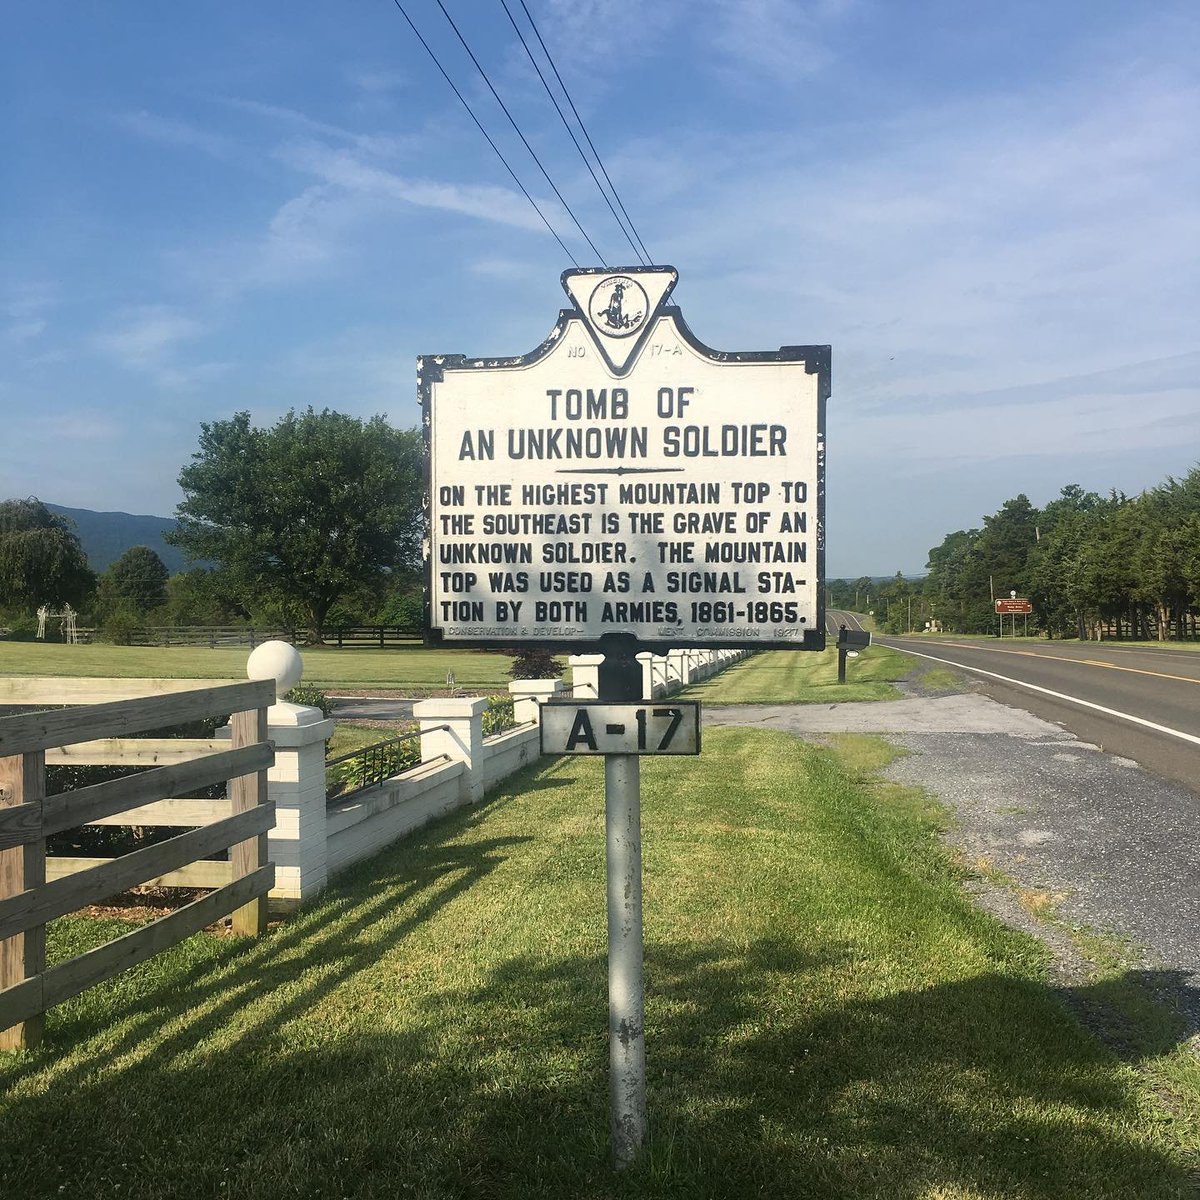 Somewhere near the top of Signal Knob an unknown soldier rests in a shallow gave, high above the Valley floor. His was one of many lives lost far from the battlefield over the course of the war. #historicmarker #readtheplaque #civilwarhistory #middletownva #cedarcreekbattlefield